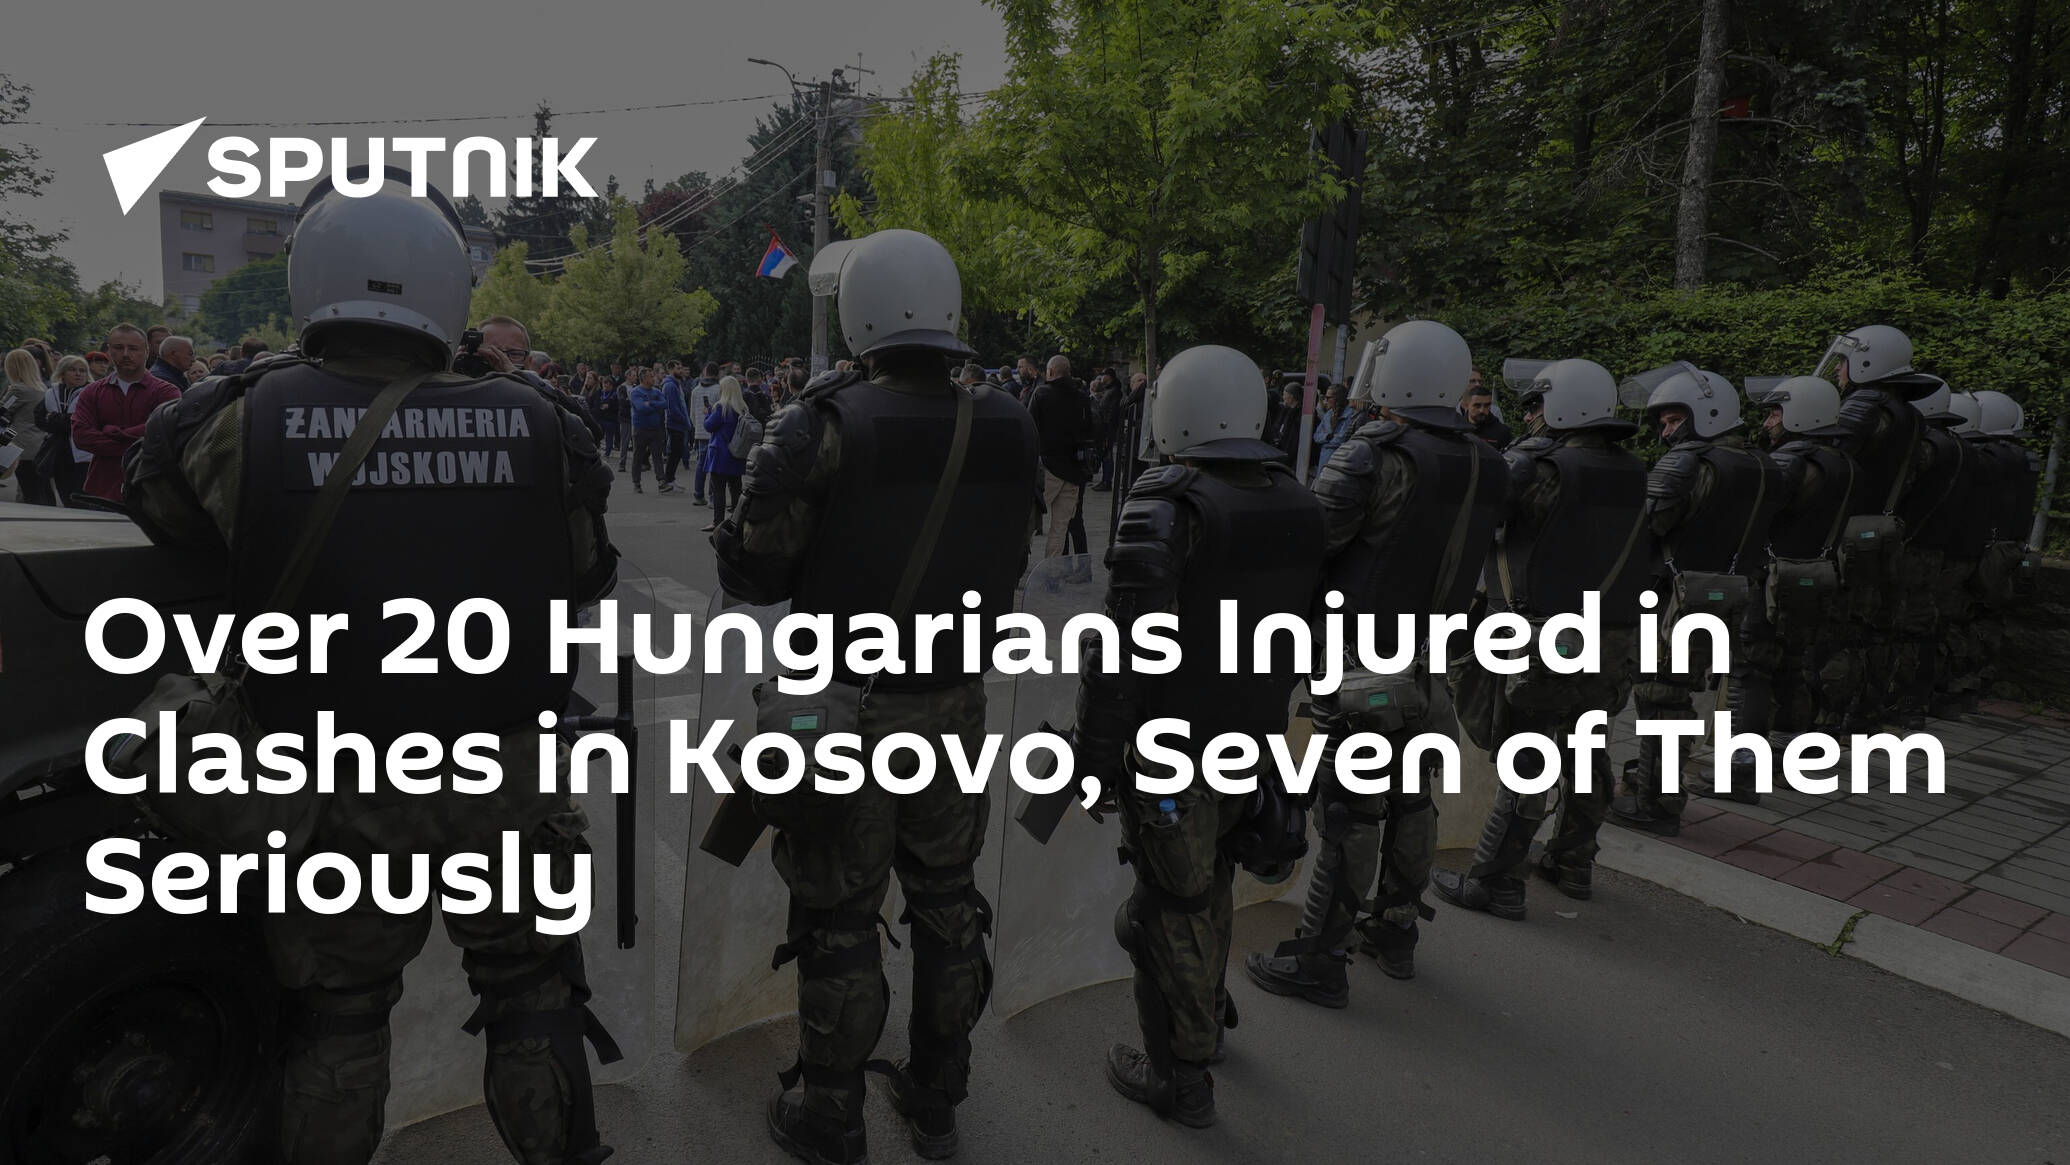 Over 20 Hungarians Injured in Clashes in Kosovo, Seven of Them Seriously